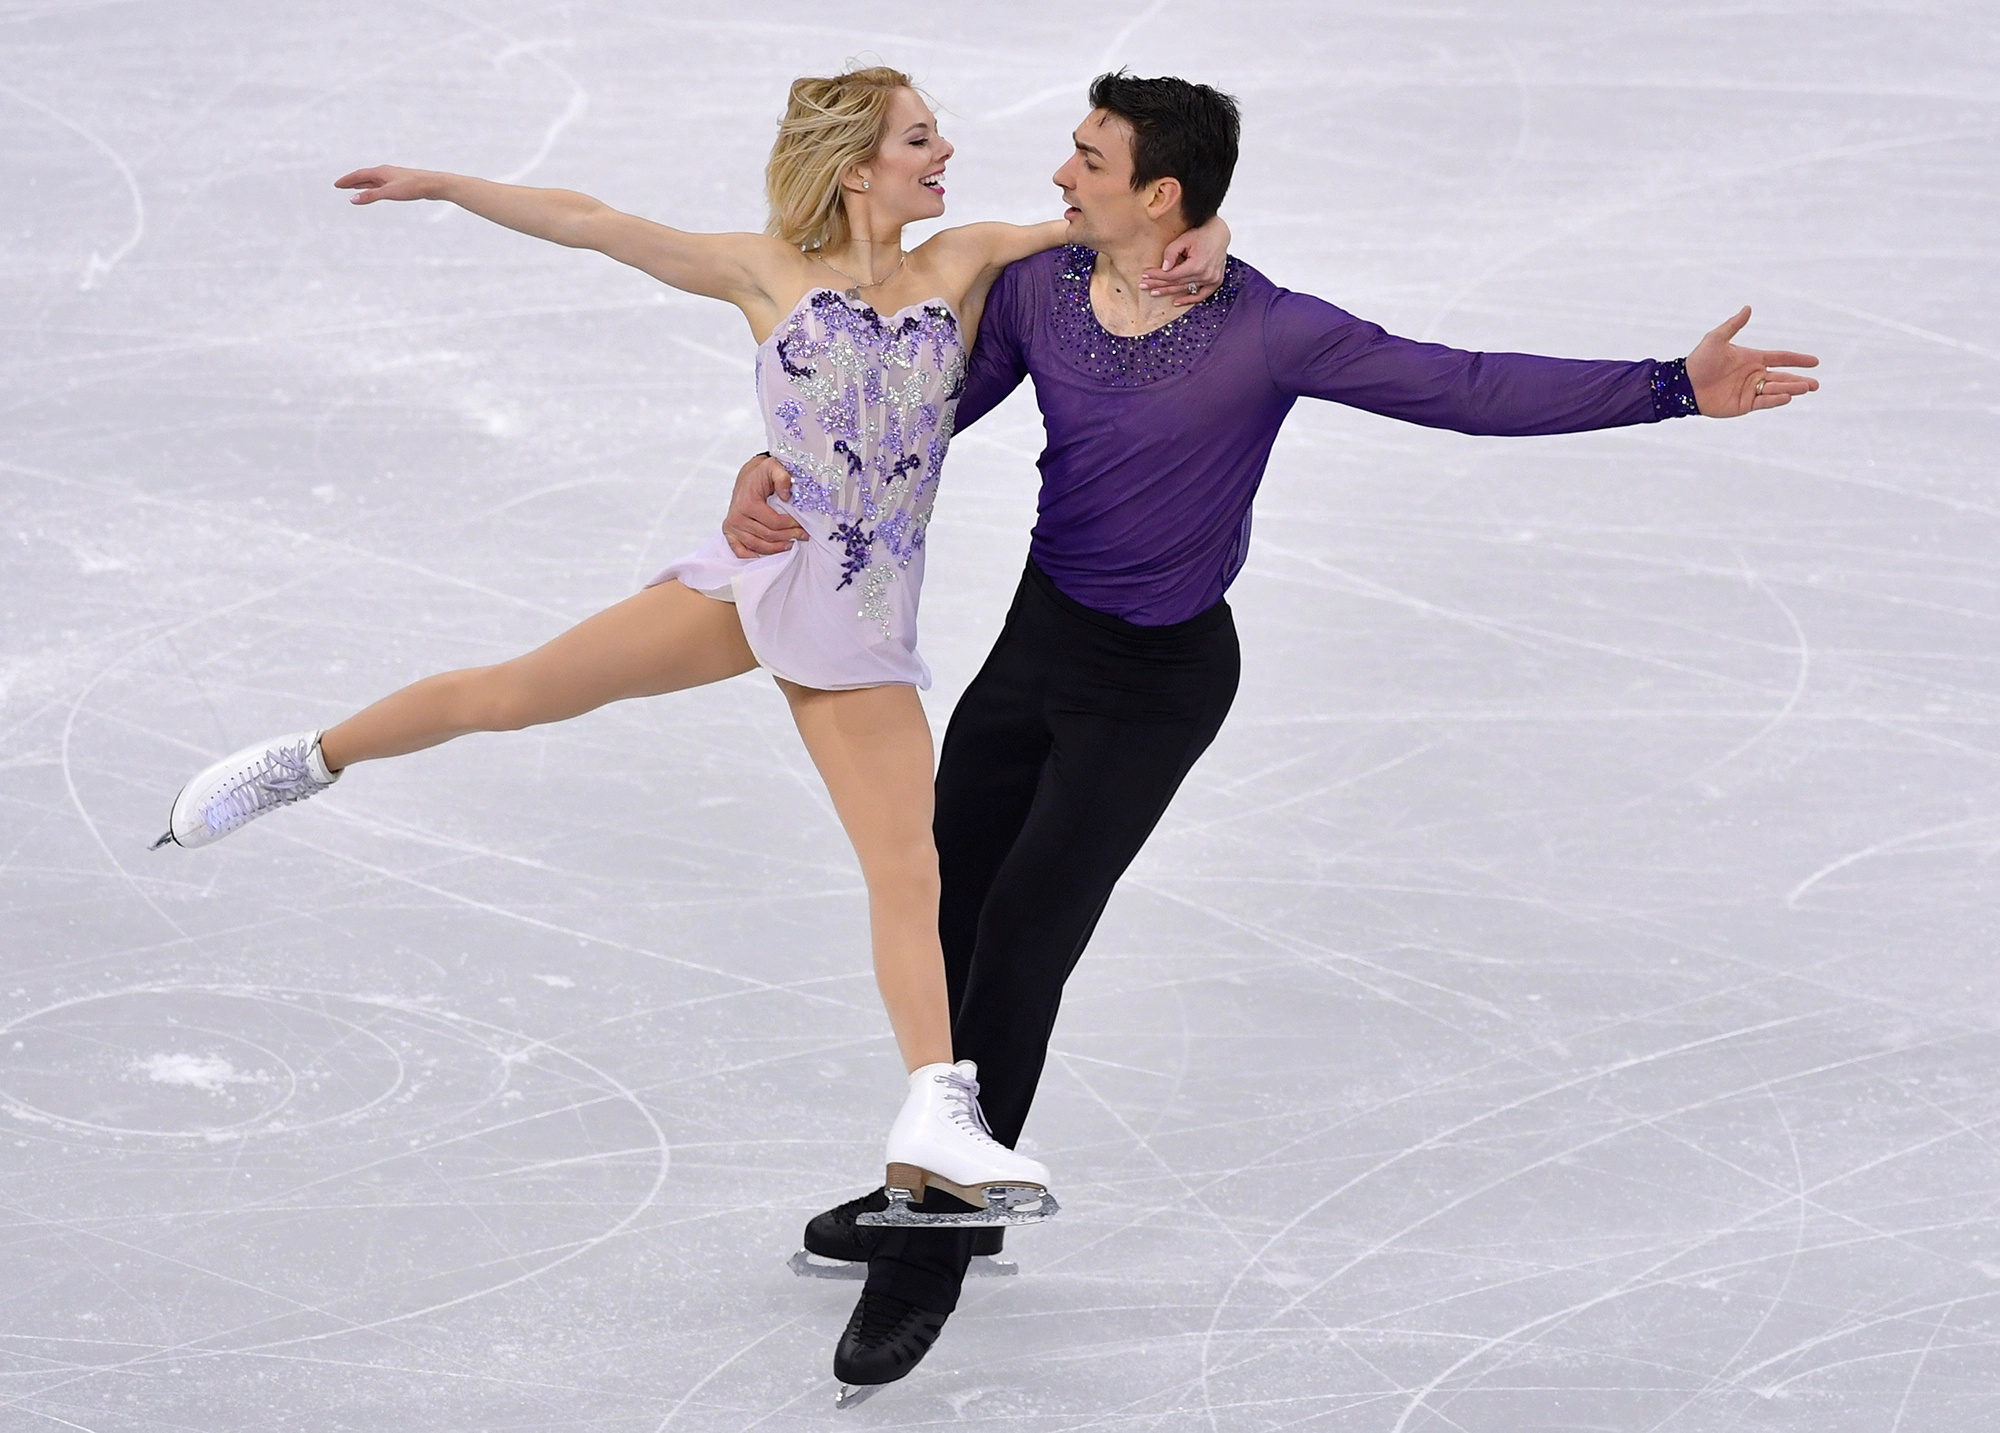 Ice Dancing: Olympic couples, Olivia Smart and Zachary Donohue, American ice dancers, Pair skating. 2000x1440 HD Background.